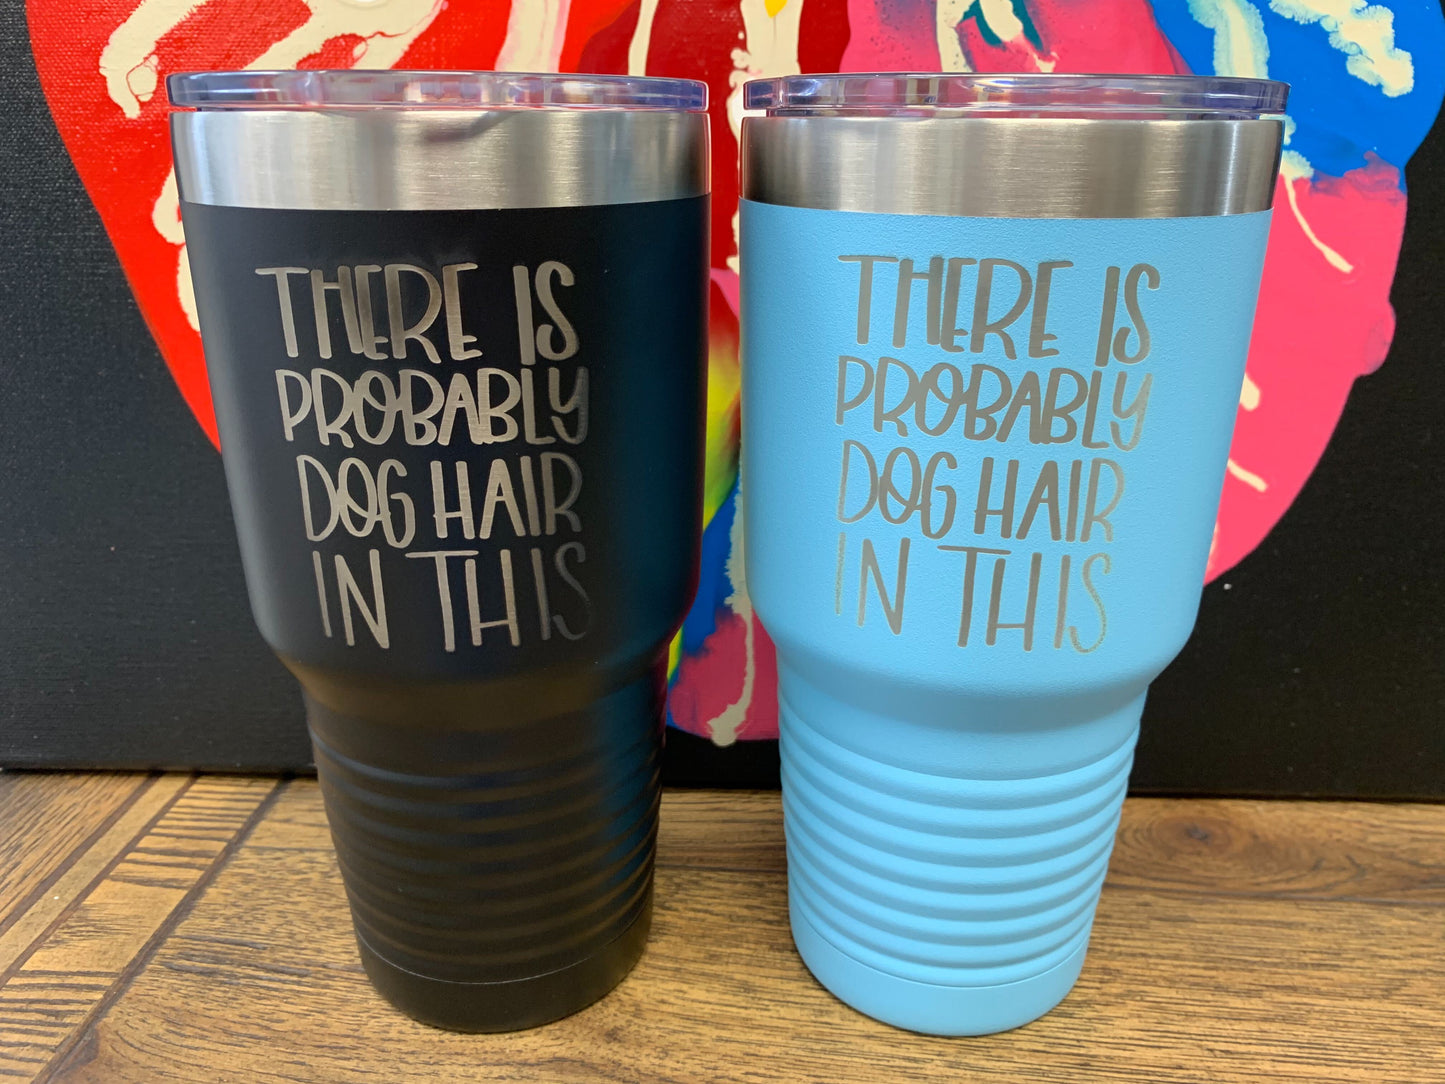 Image of two travel mugs, one in black and one in light blue, both with metal rims at the top, clear plastic lids, and the words "There is probably dog hair in this" laser etched on the side.